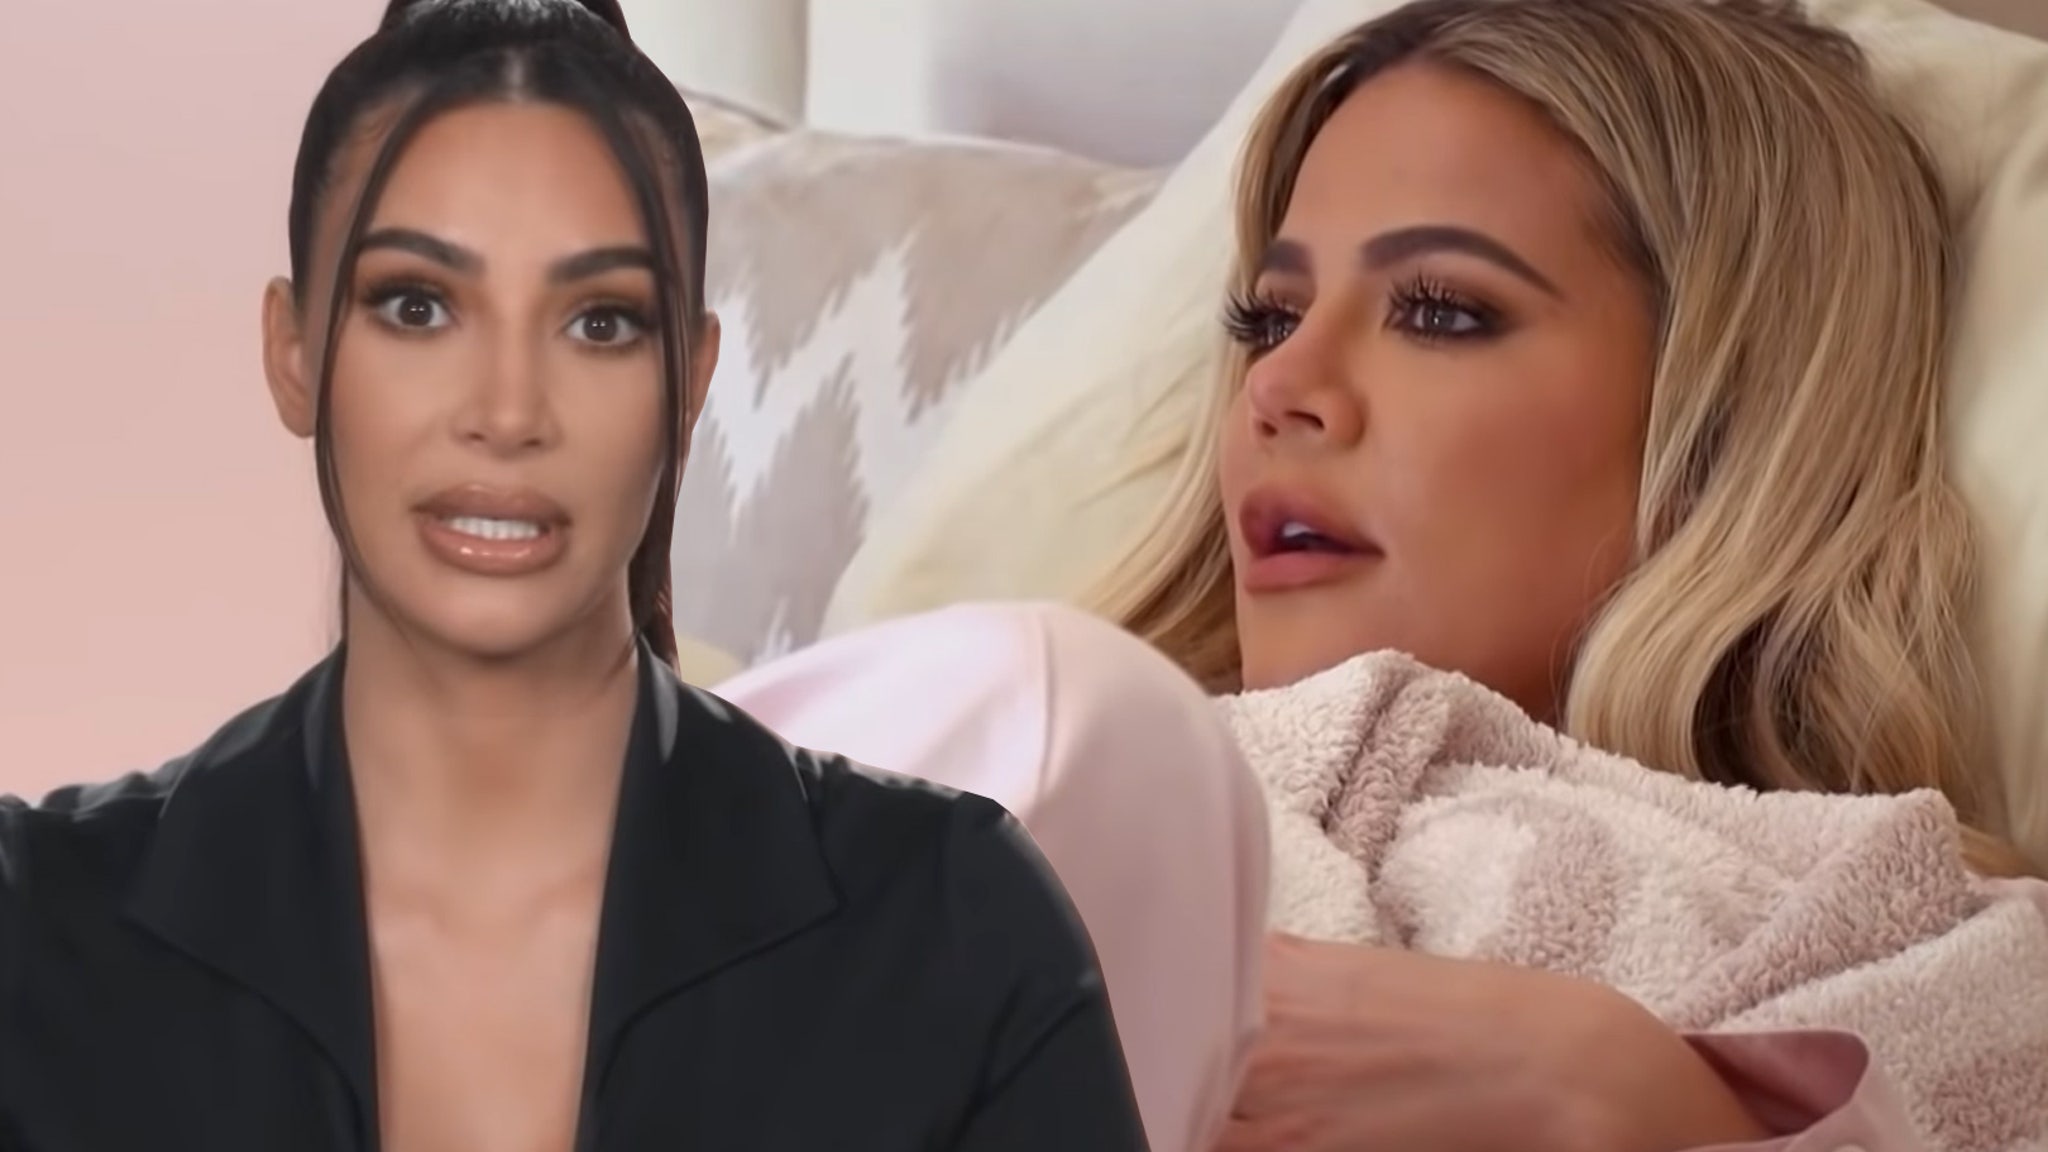 KUWTK Recap: Kim Overwhelmed While Kanye Has Covid, Tristan Helps Sick Khloe Care for True